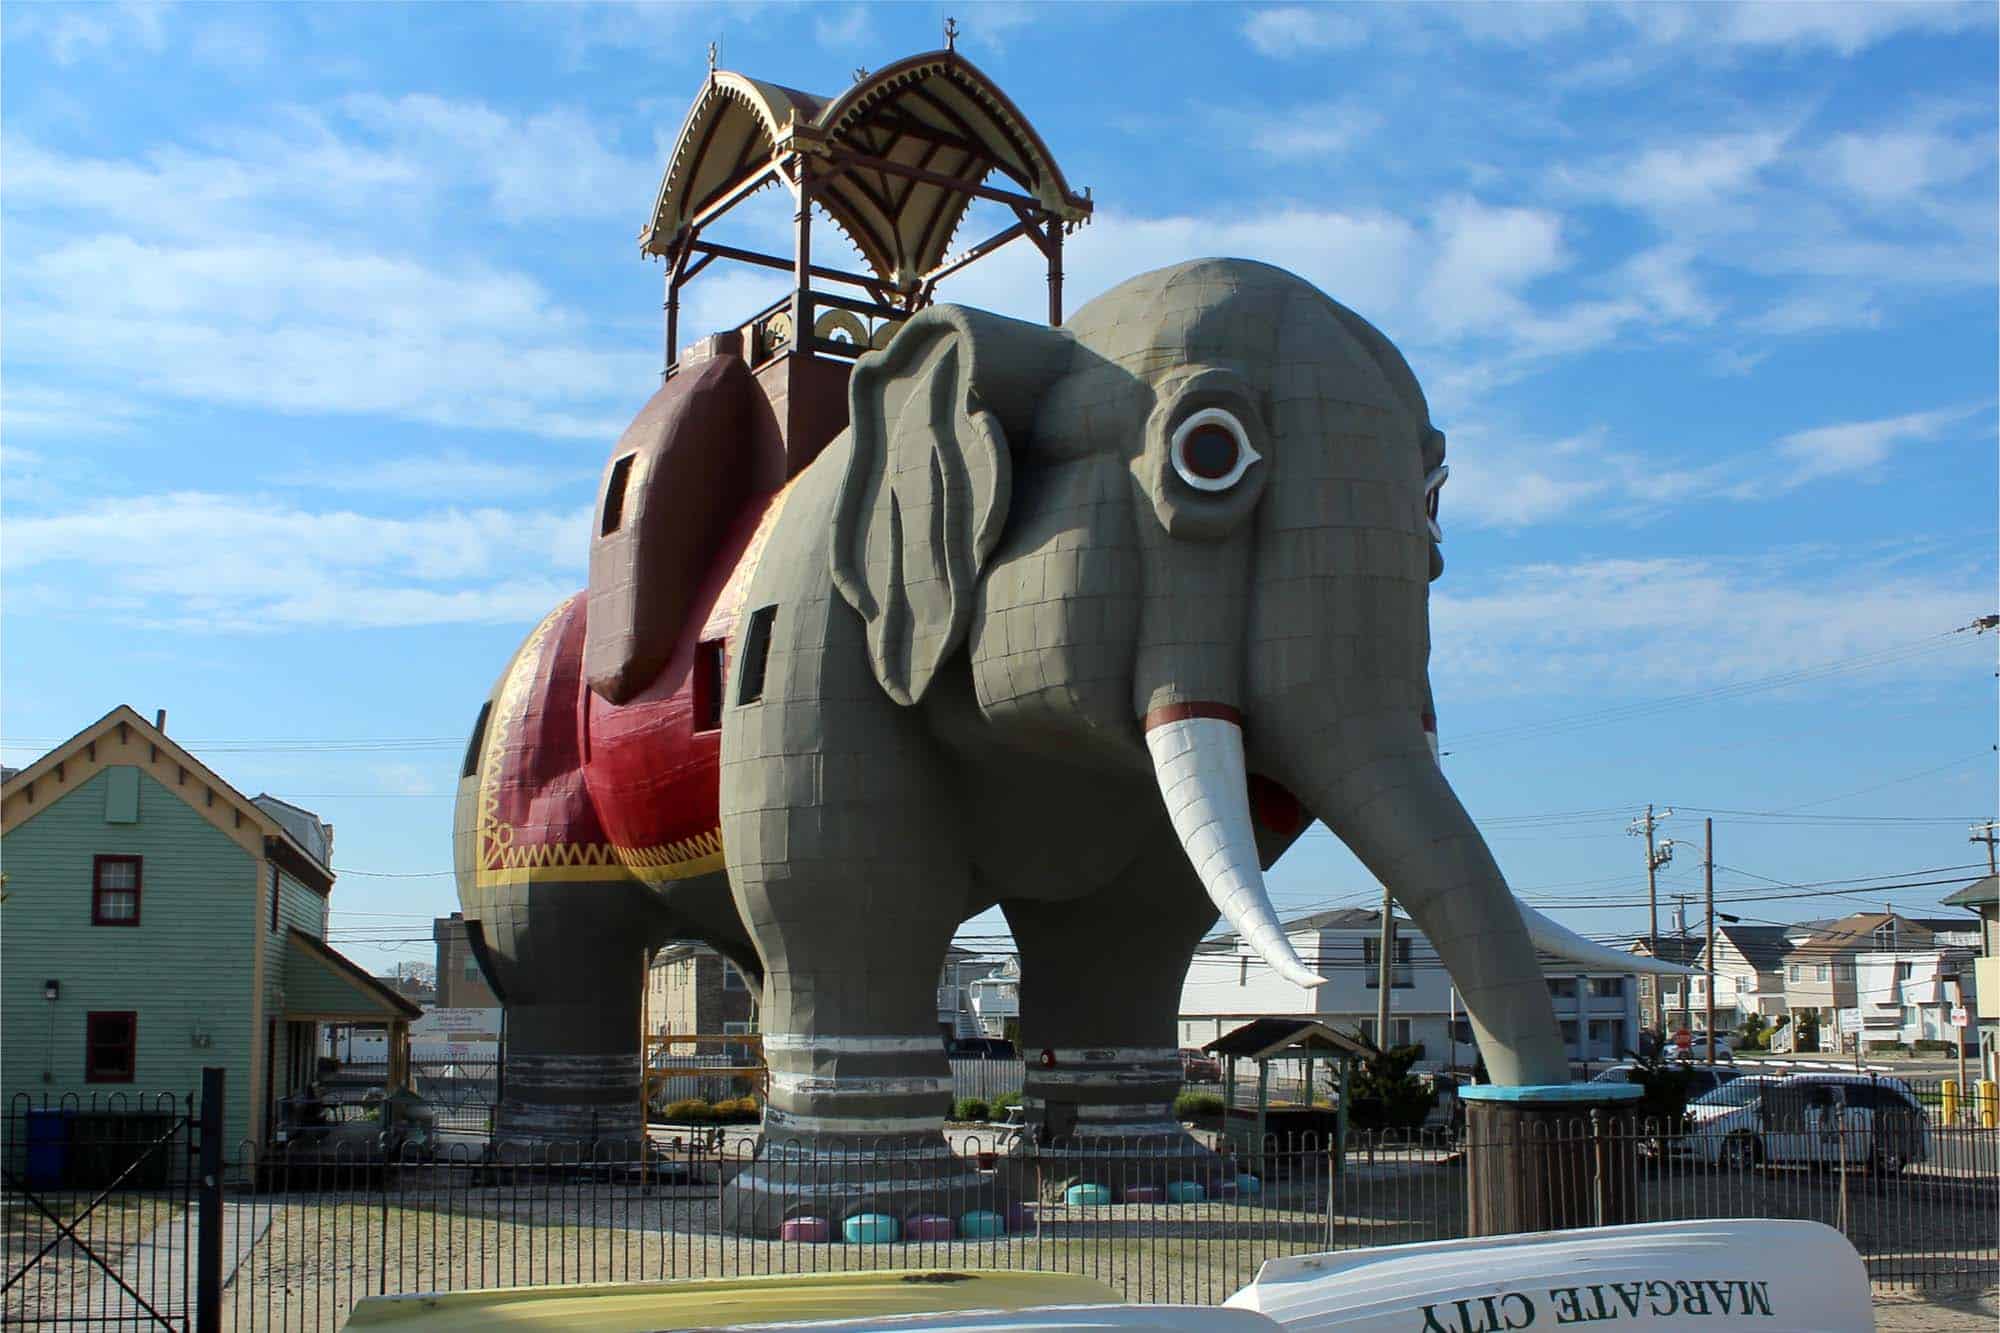 Lucy the Elephant attraction at Margate City, NJ beach